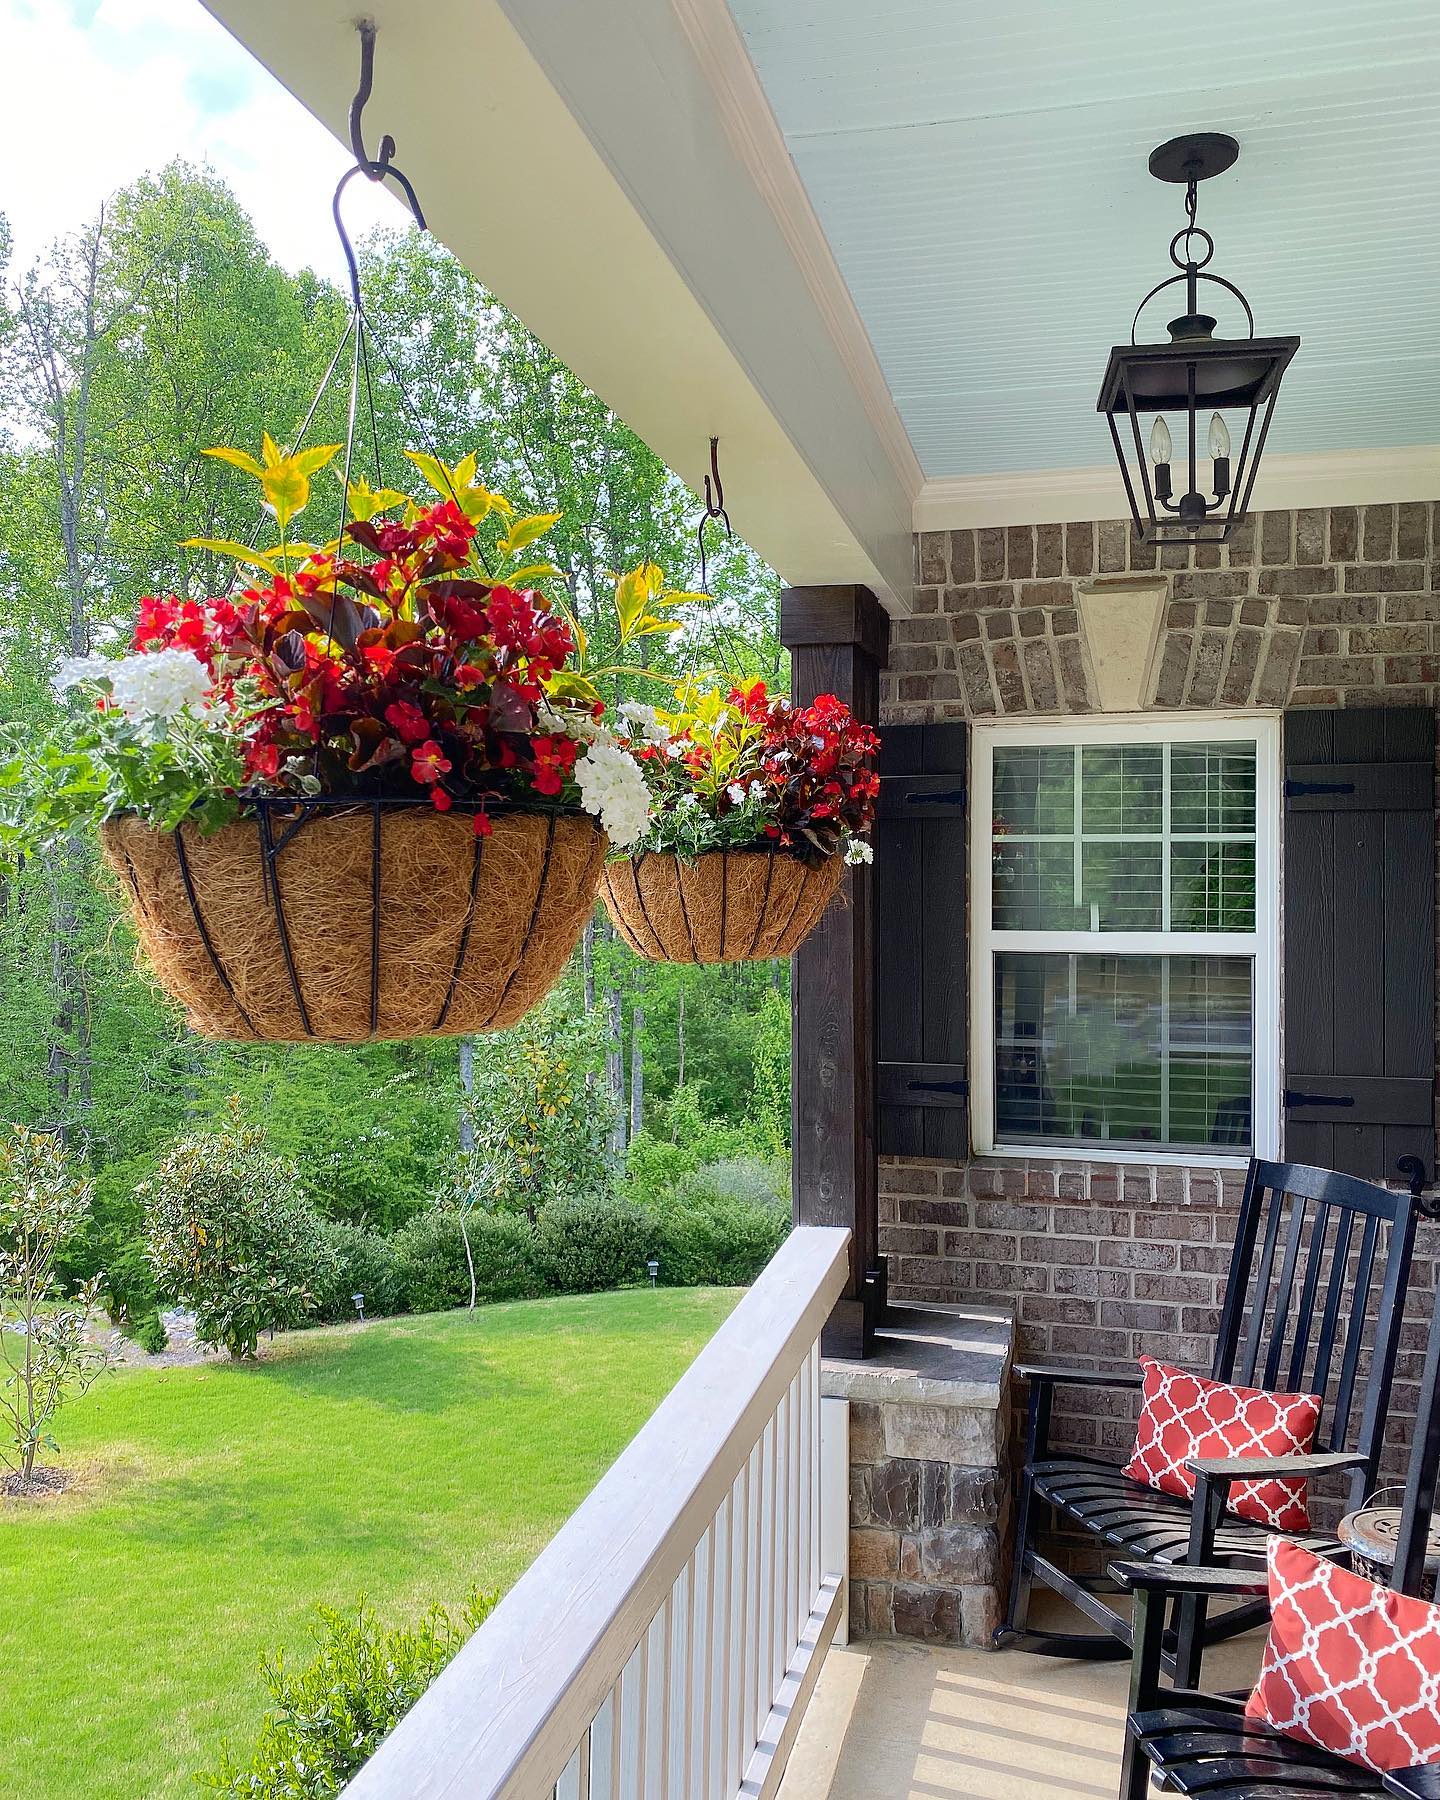 What a beautiful day, it was the perfect morning for a little front porch sitting and coffee ☕️ while admiring my pretty hanging baskets. I buy them every year from a little local garden shop, at Spot Rd. my local friends know the place you can shoot a gun, throw an axe 🪓 and buy the prettiest hanging baskets of the season 😂😂😂
. 
.
.
#jenrondesigns 
#flowergarden 
#frontporch 
#farmhouse 
#farmstyling 
#modernfarmhouse 
#diyhomedecor 
#diygarden 
#farmhousedesignrules 
#farmhouseinspired 
#modernfarmhouse 
#countryliving 
#countrylivingmagazine 
#countrylivingmag 
#countrysamplerfarmhousestyle 
#southernliving 
#southerncharm 
#homemakingissweet 
#flowerlovinfriends 
#seasonaldecorsaturdays 
#homedecor 
#dailydecordose 
#floraldesign 
#gardening 
#insta_neighborly 
 #homeshapeslives 
#homestylinginspo 
#homedesign 
#designinspiration 
#seasonaldecor 
#farmfresh